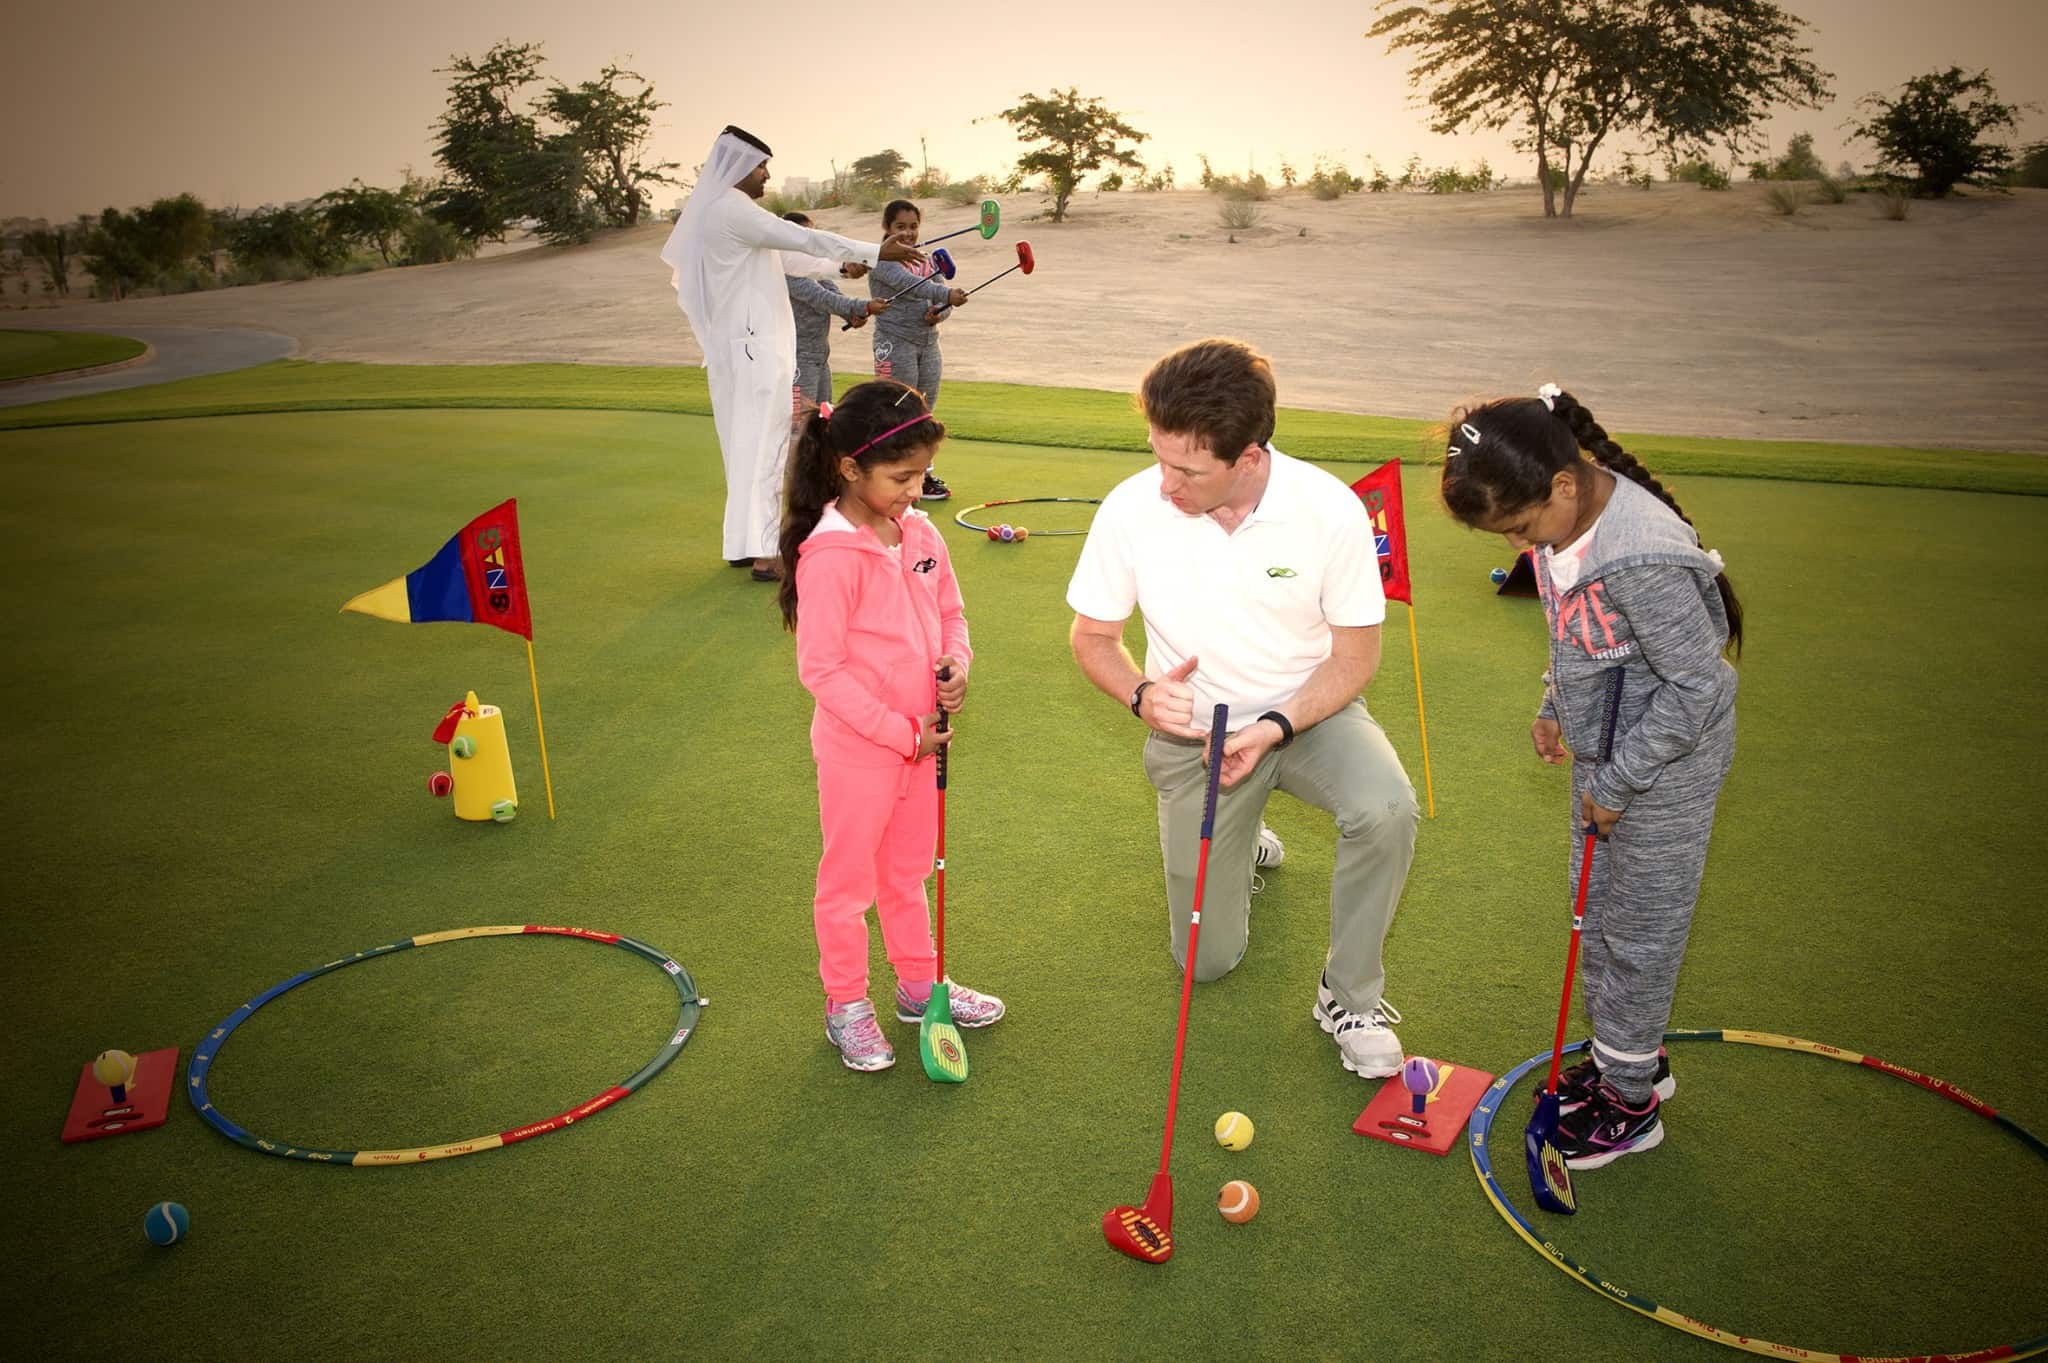 Mohammed Al Naimi and Rhys Beecher teaching the youngsters on the practice putting green.